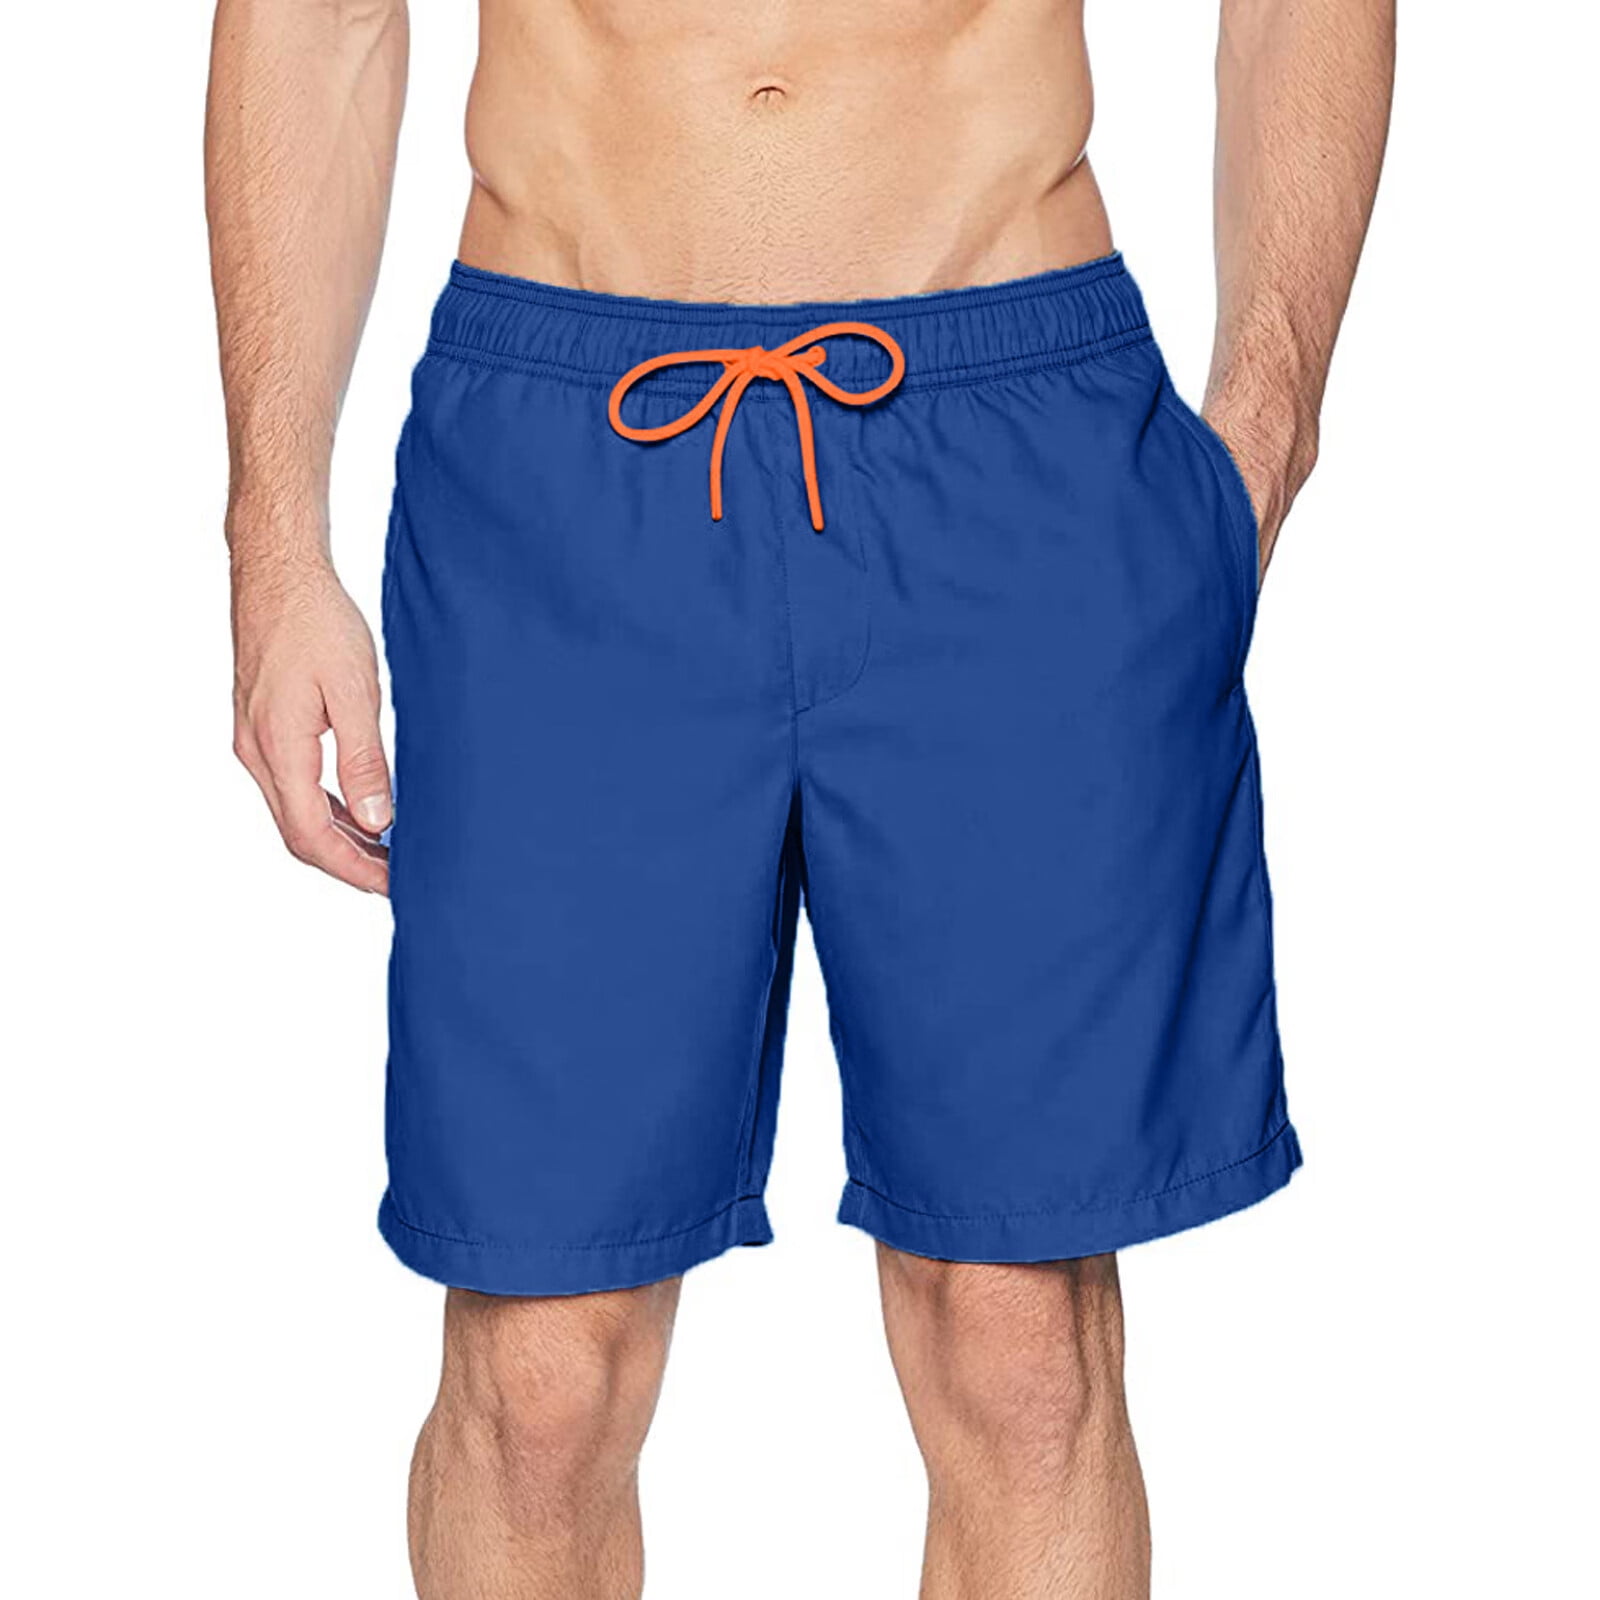 Blue Inc INC Mens Swimwear Navy Blue USA Size 2XL Two-Tone Liam Solid Quick-Dry $45 244 